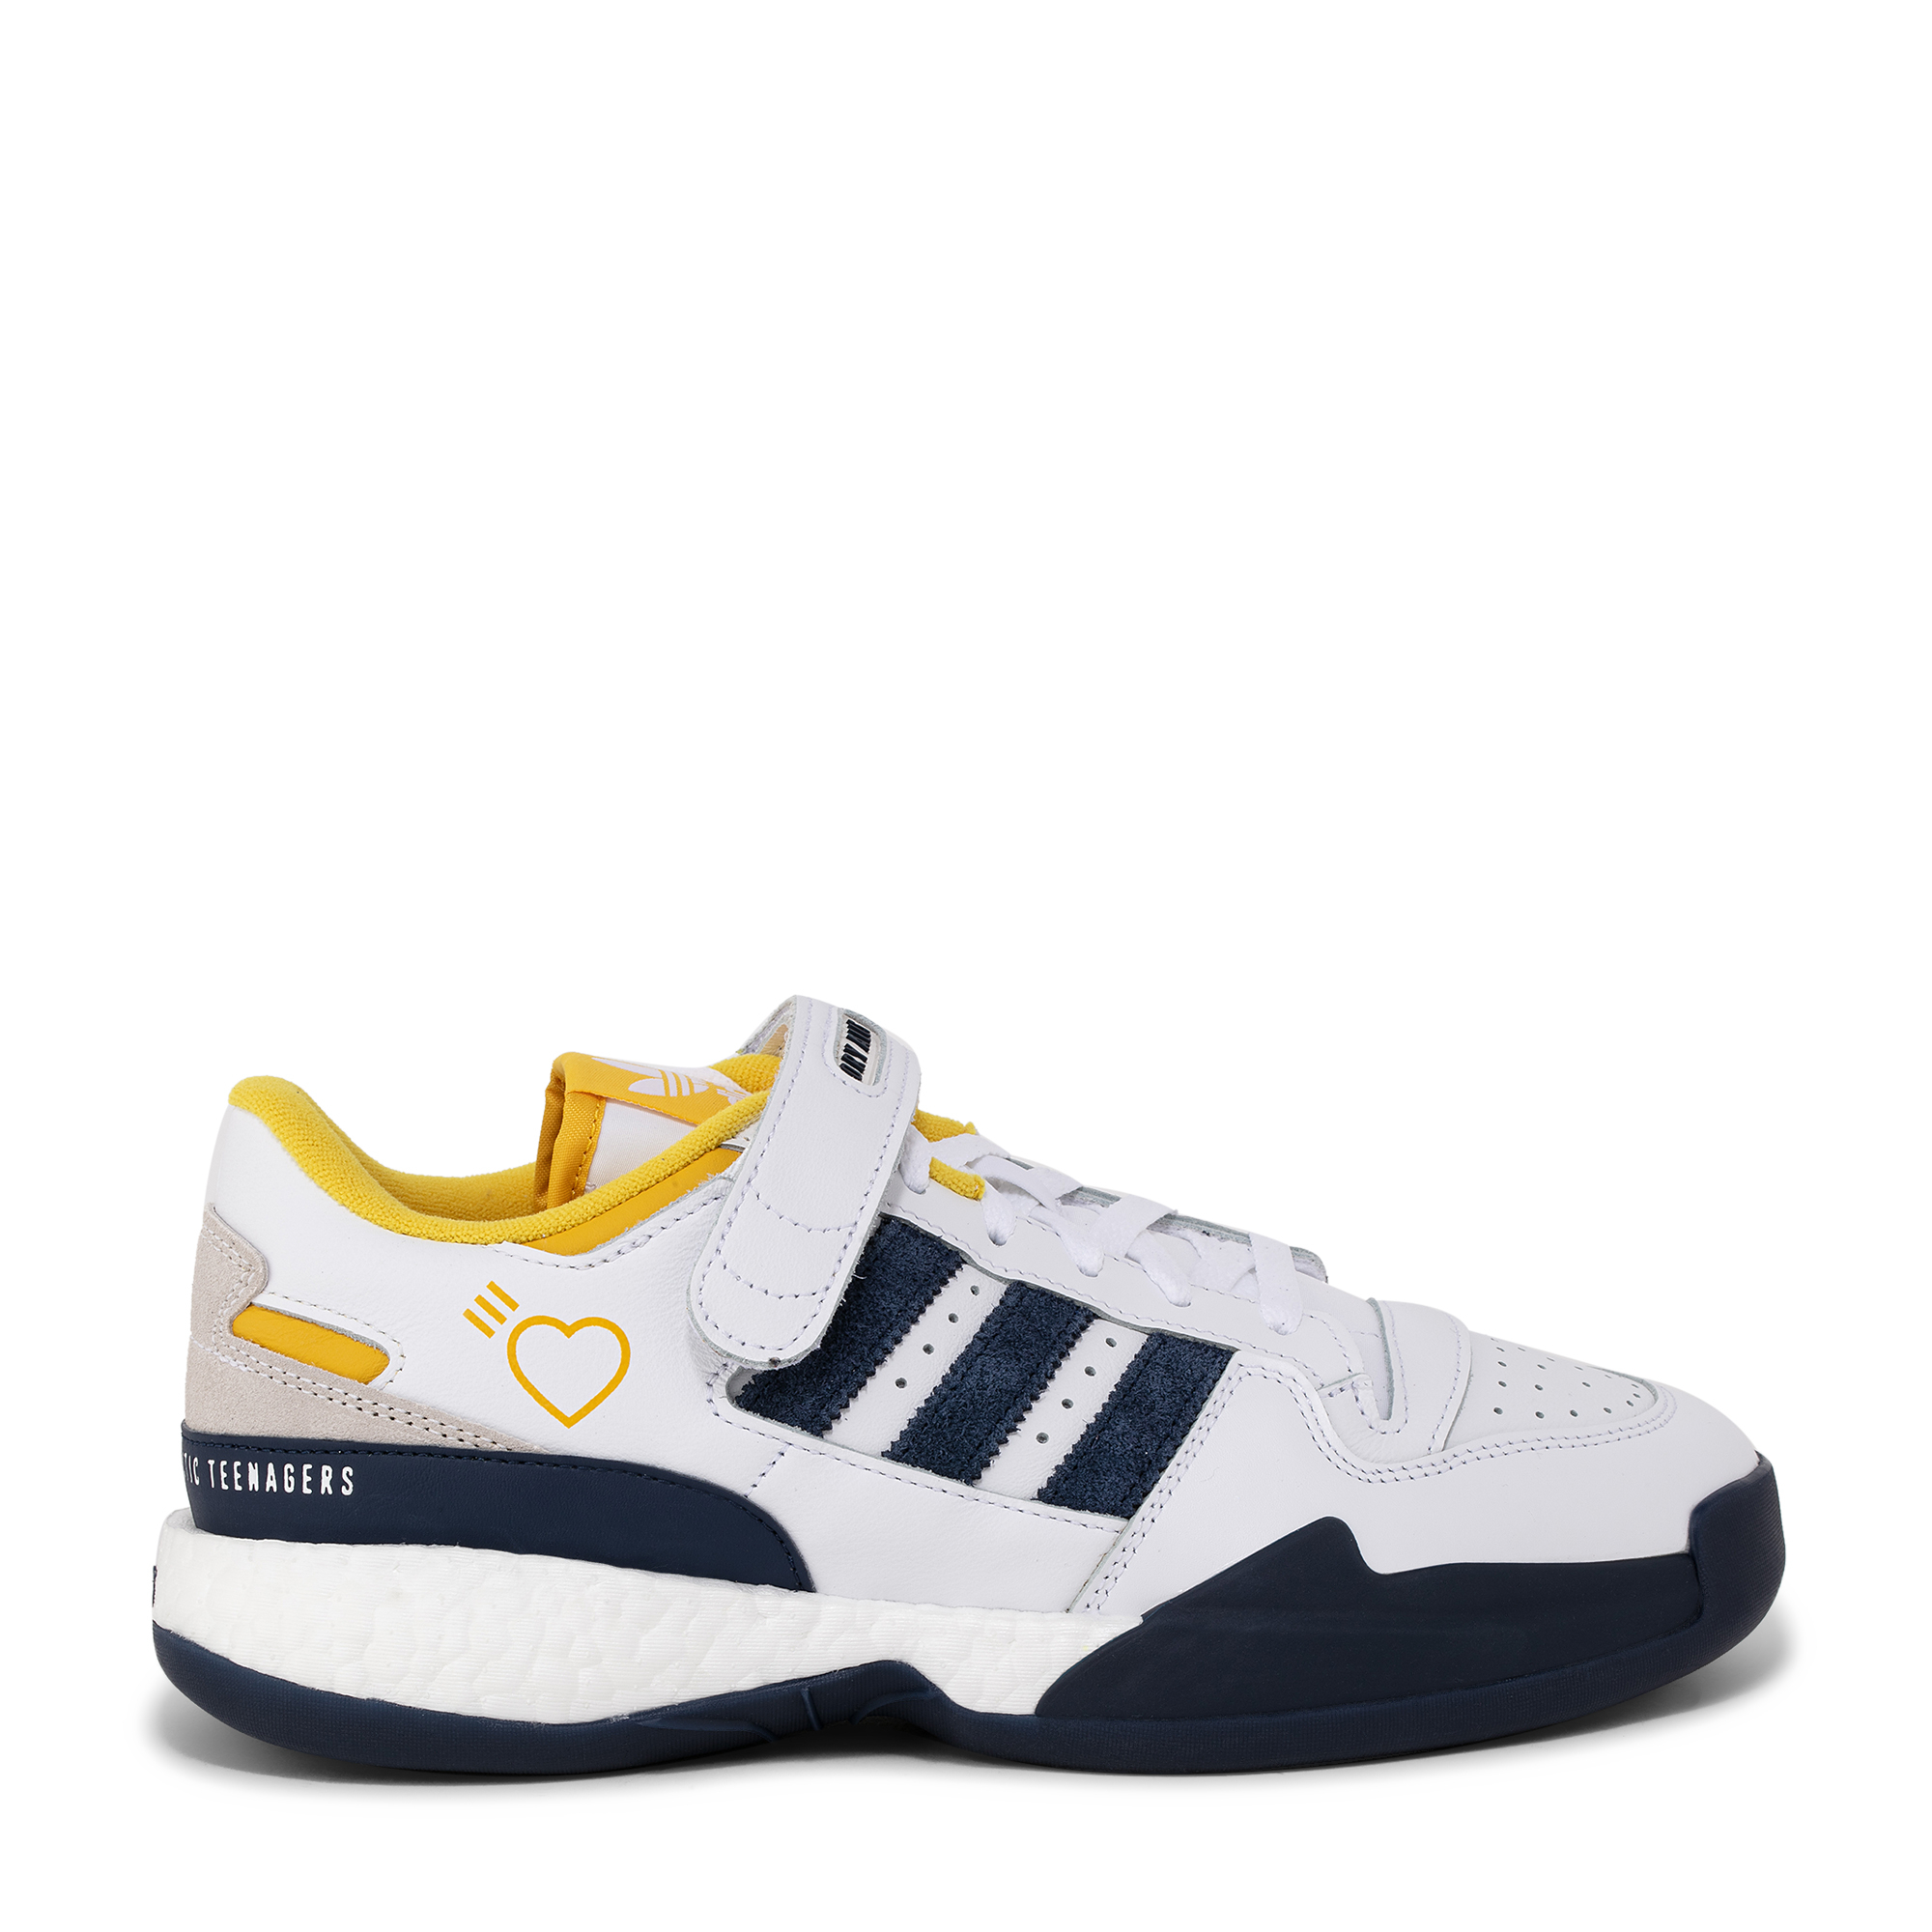 Adidas x Human Made Forum sneakers for Men - White in KSA | Level 